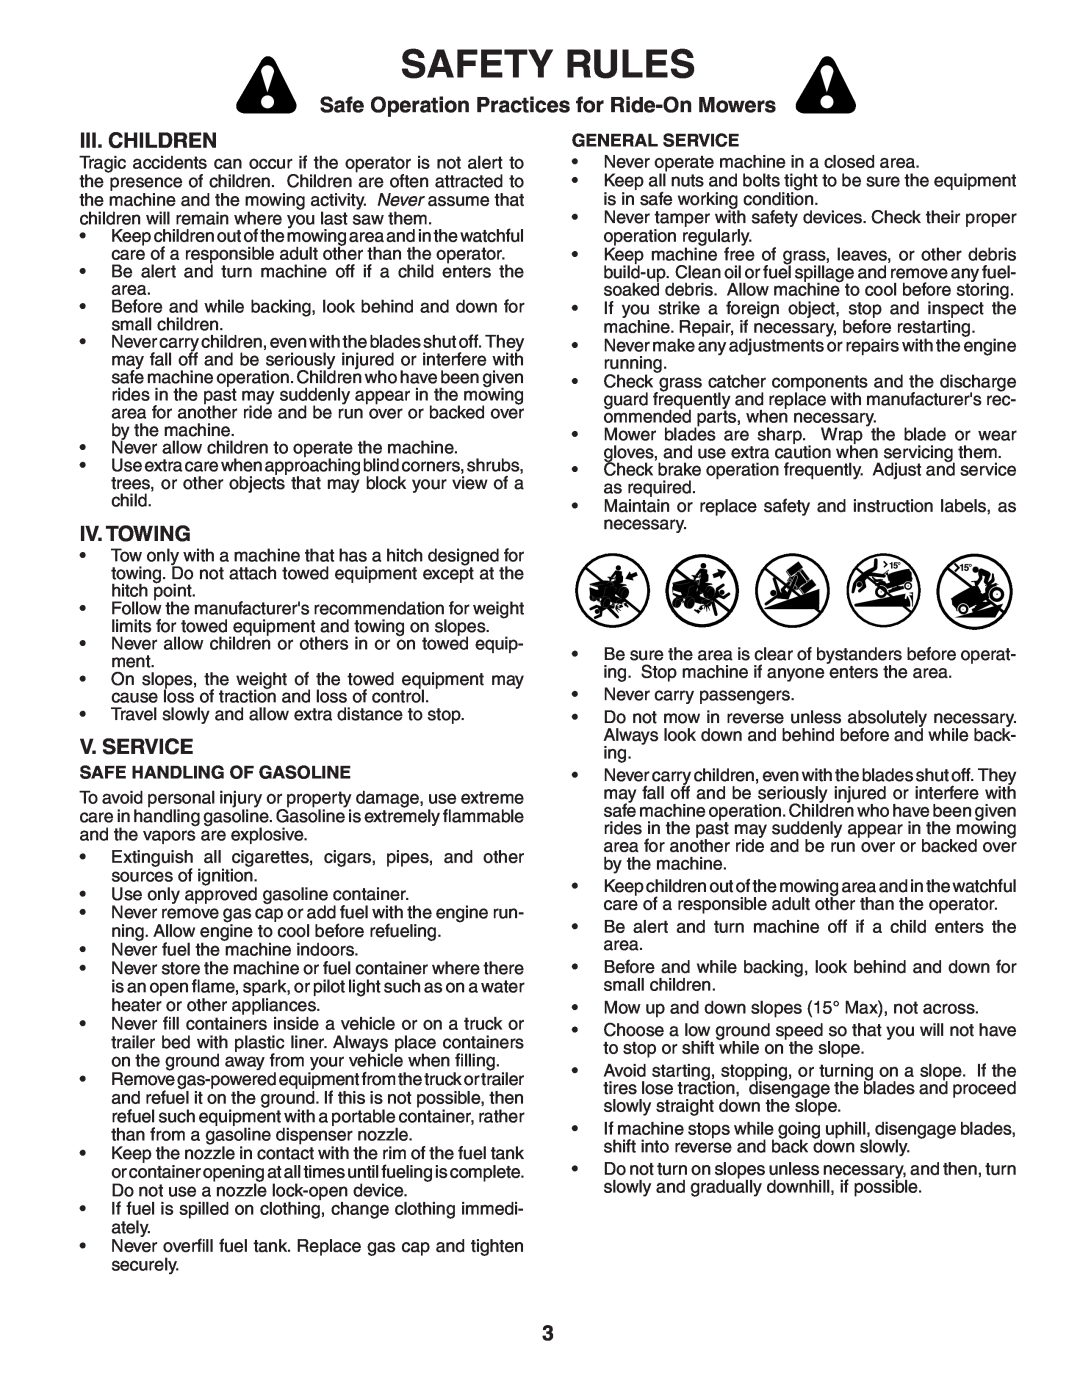 Poulan 405035 manual Iii. Children, Iv. Towing, V. Service, Safety Rules, Safe Operation Practices for Ride-On Mowers 